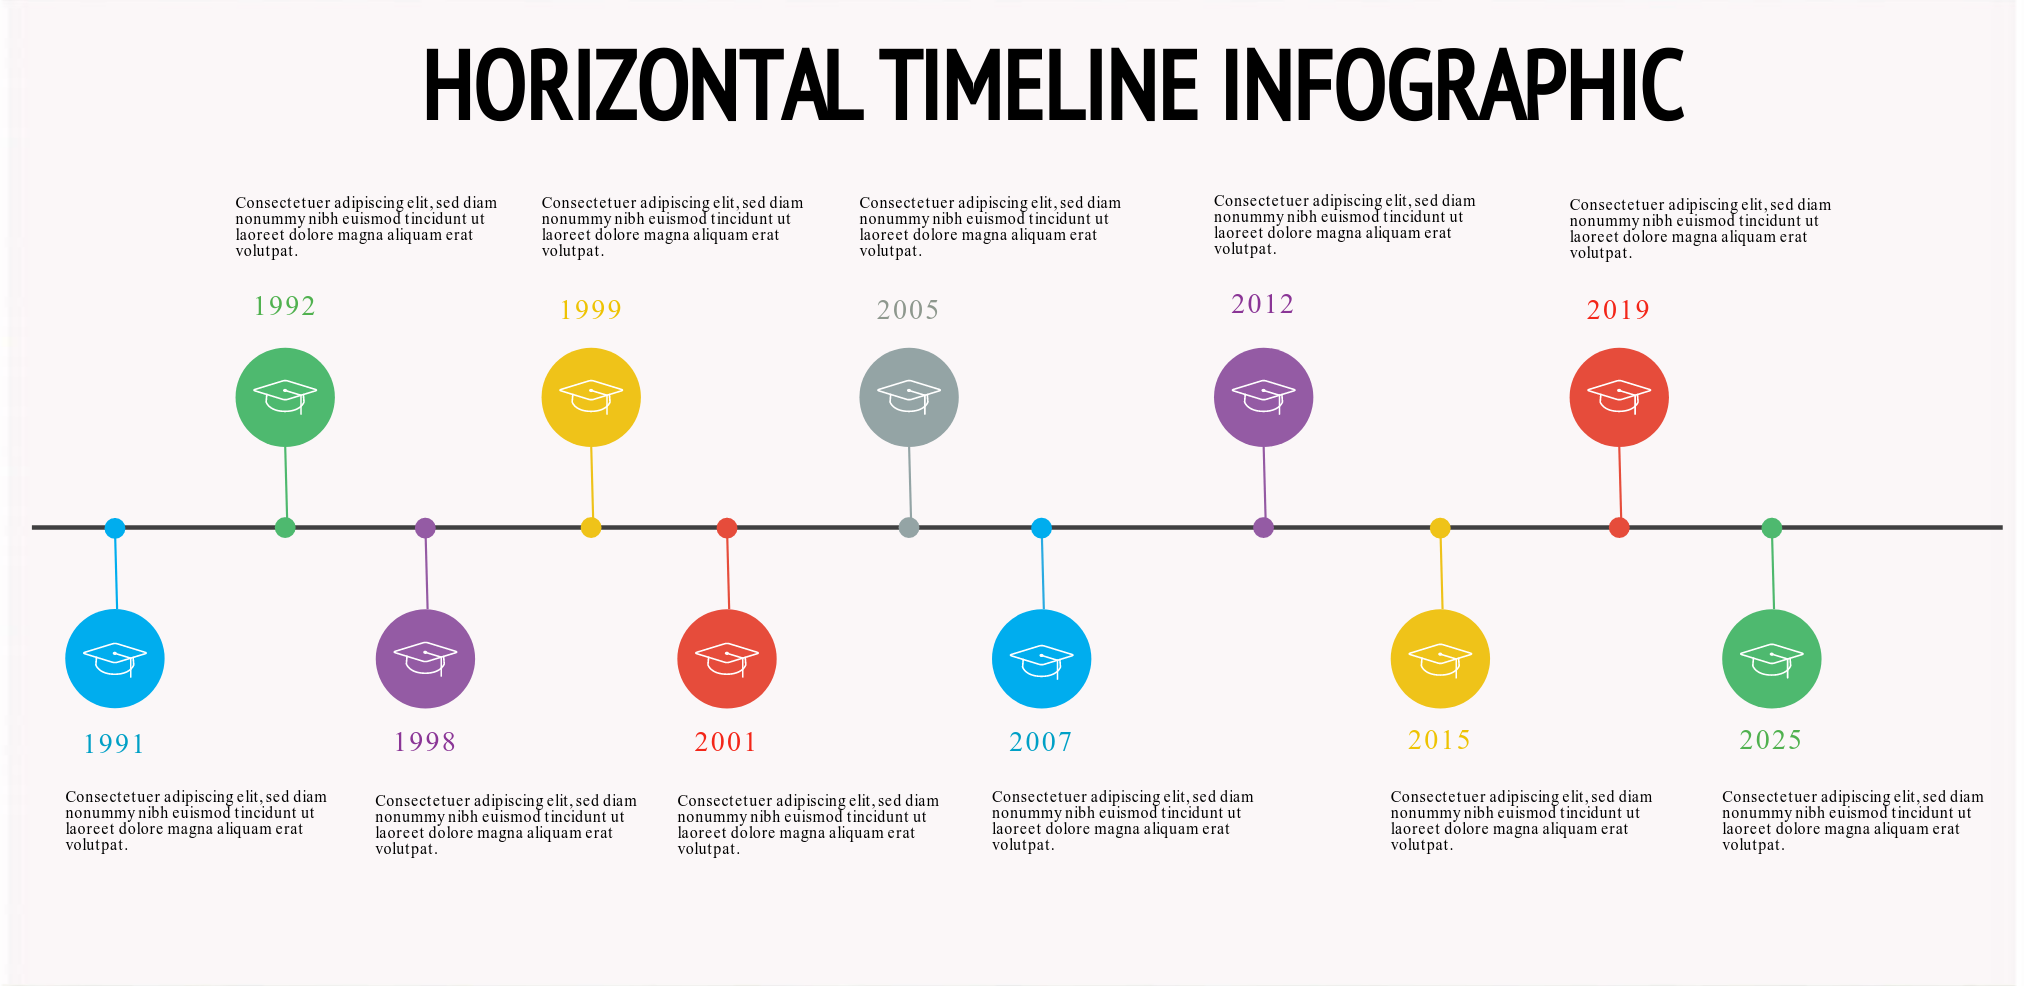 infographic timeline like a road map